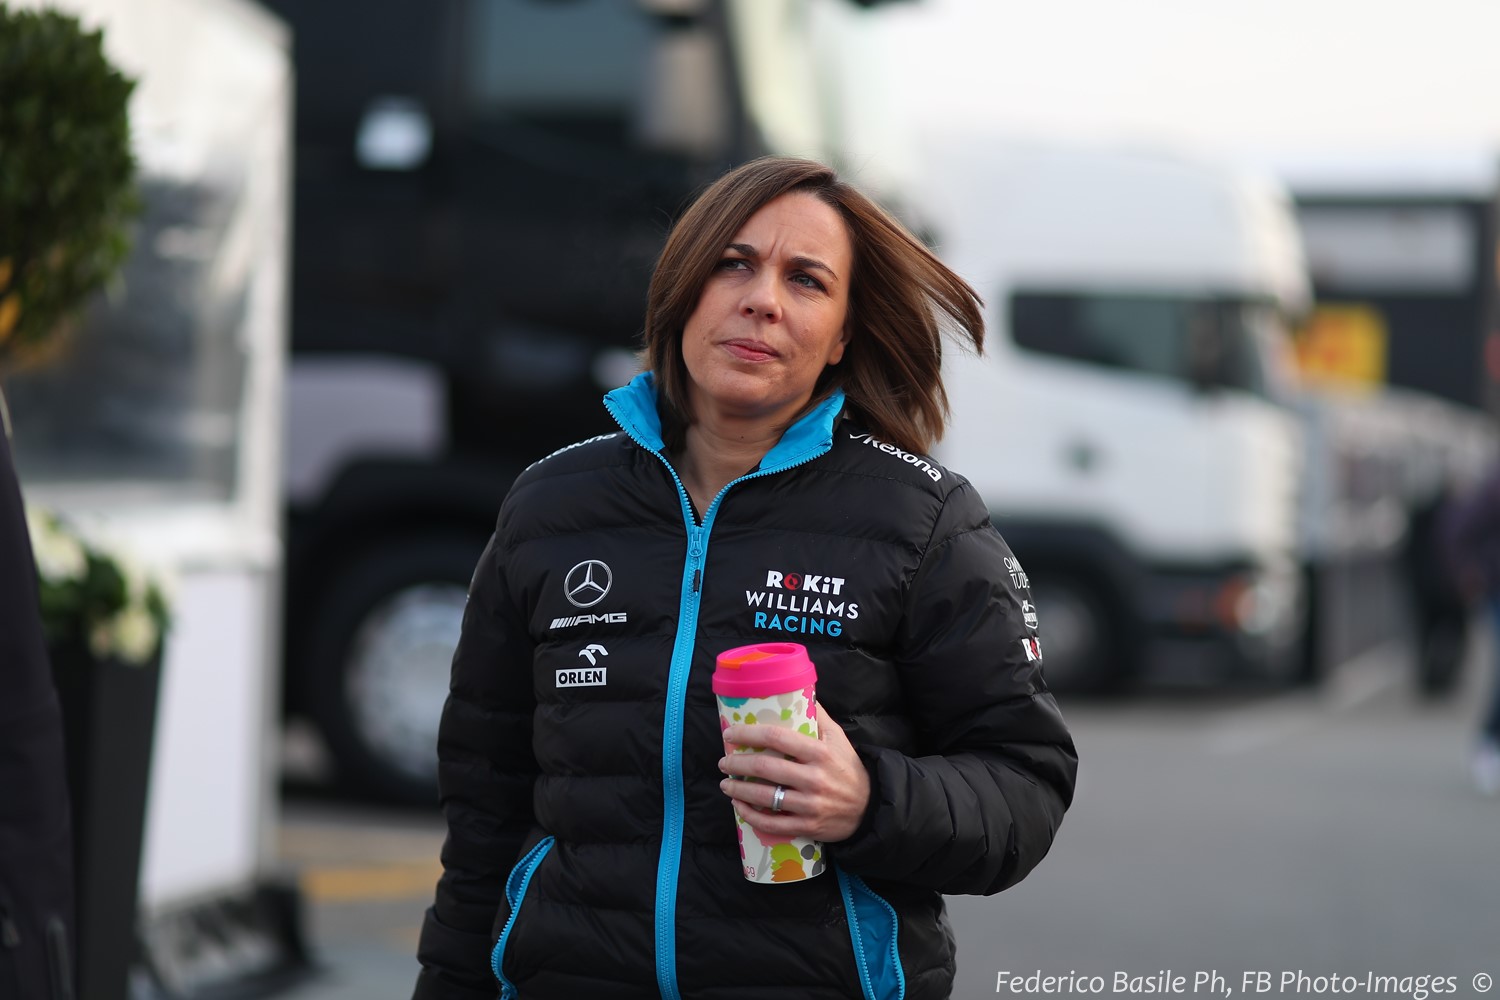 To her credit, at least Claire Williams is professional enough not to buy the design plans for their car from Mercedes